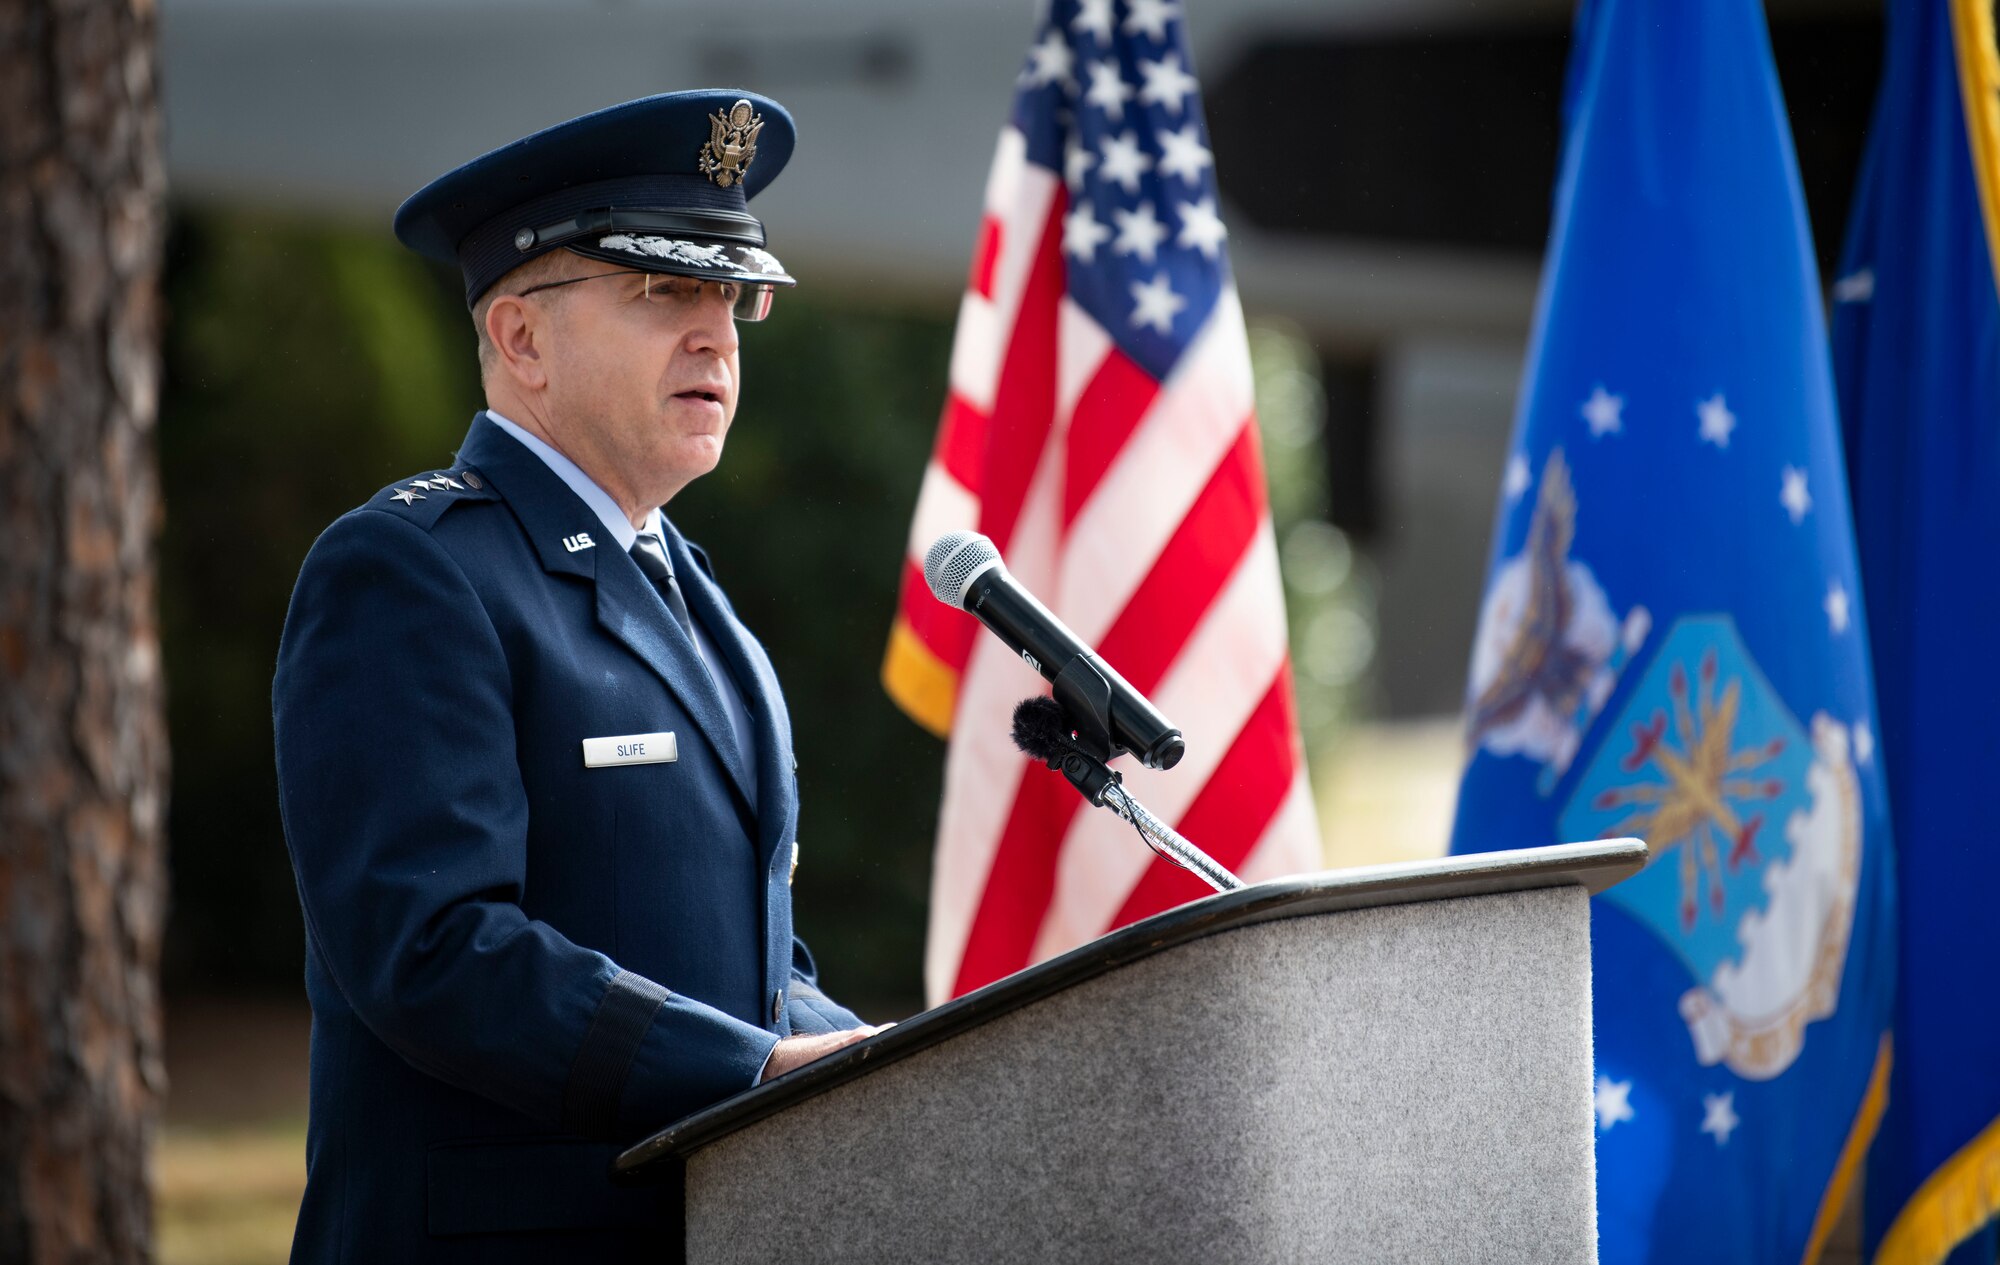 U.S. Air Force Lt. Gen. James Slife, commander of Air Force Special Operations Command, delivers remarks during a memorial ceremony at Hurlburt Field, Florida, Feb. 17, 2022.